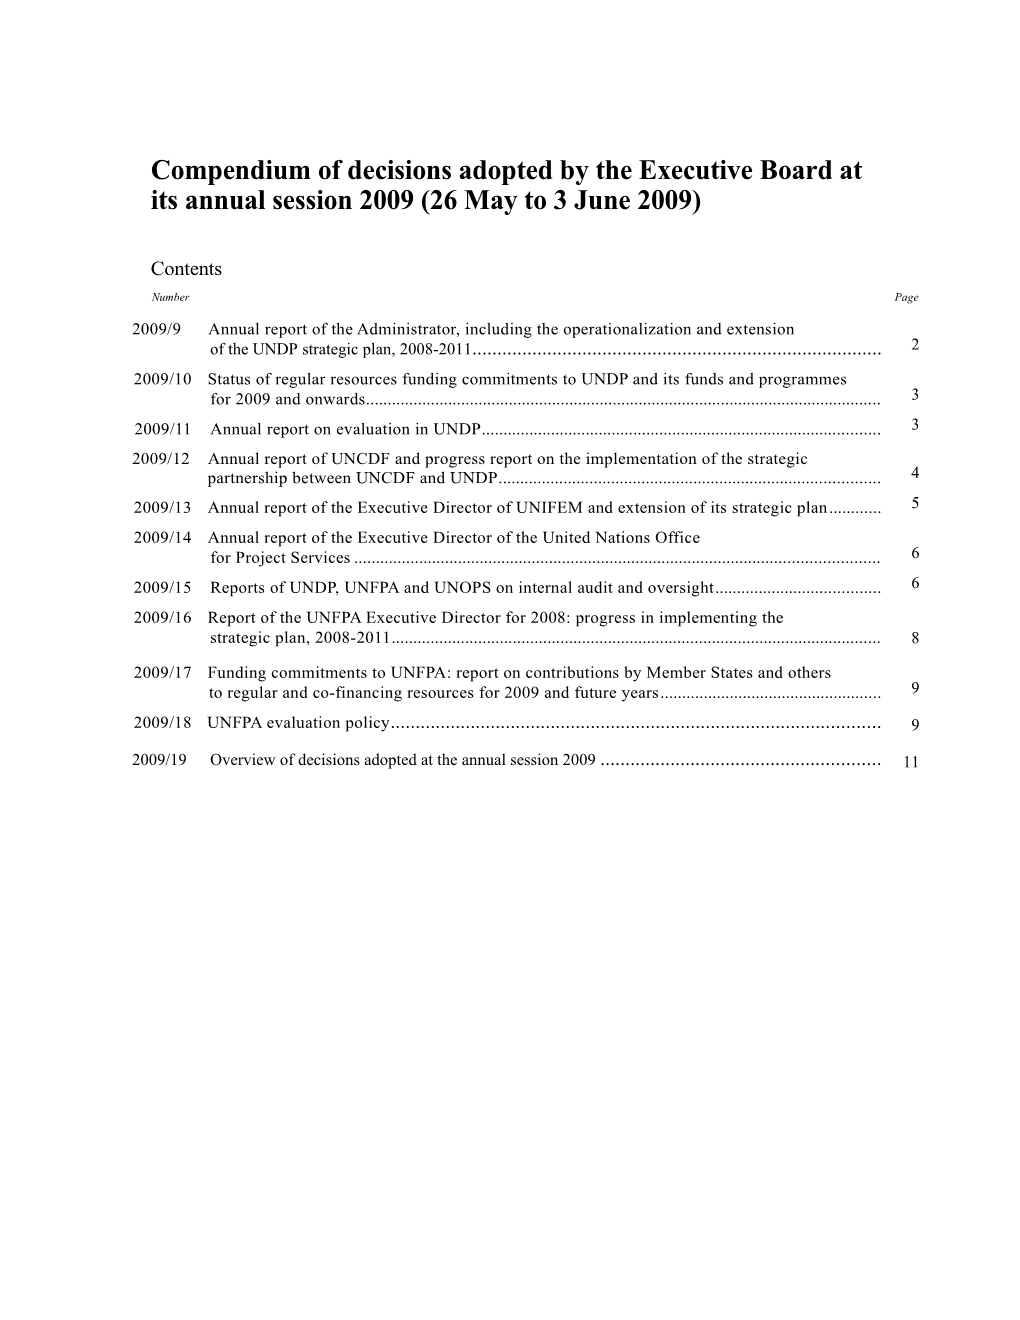 Compendium of Decisions Adopted by the Executive Board at Its Annual Session 2008 (16 To